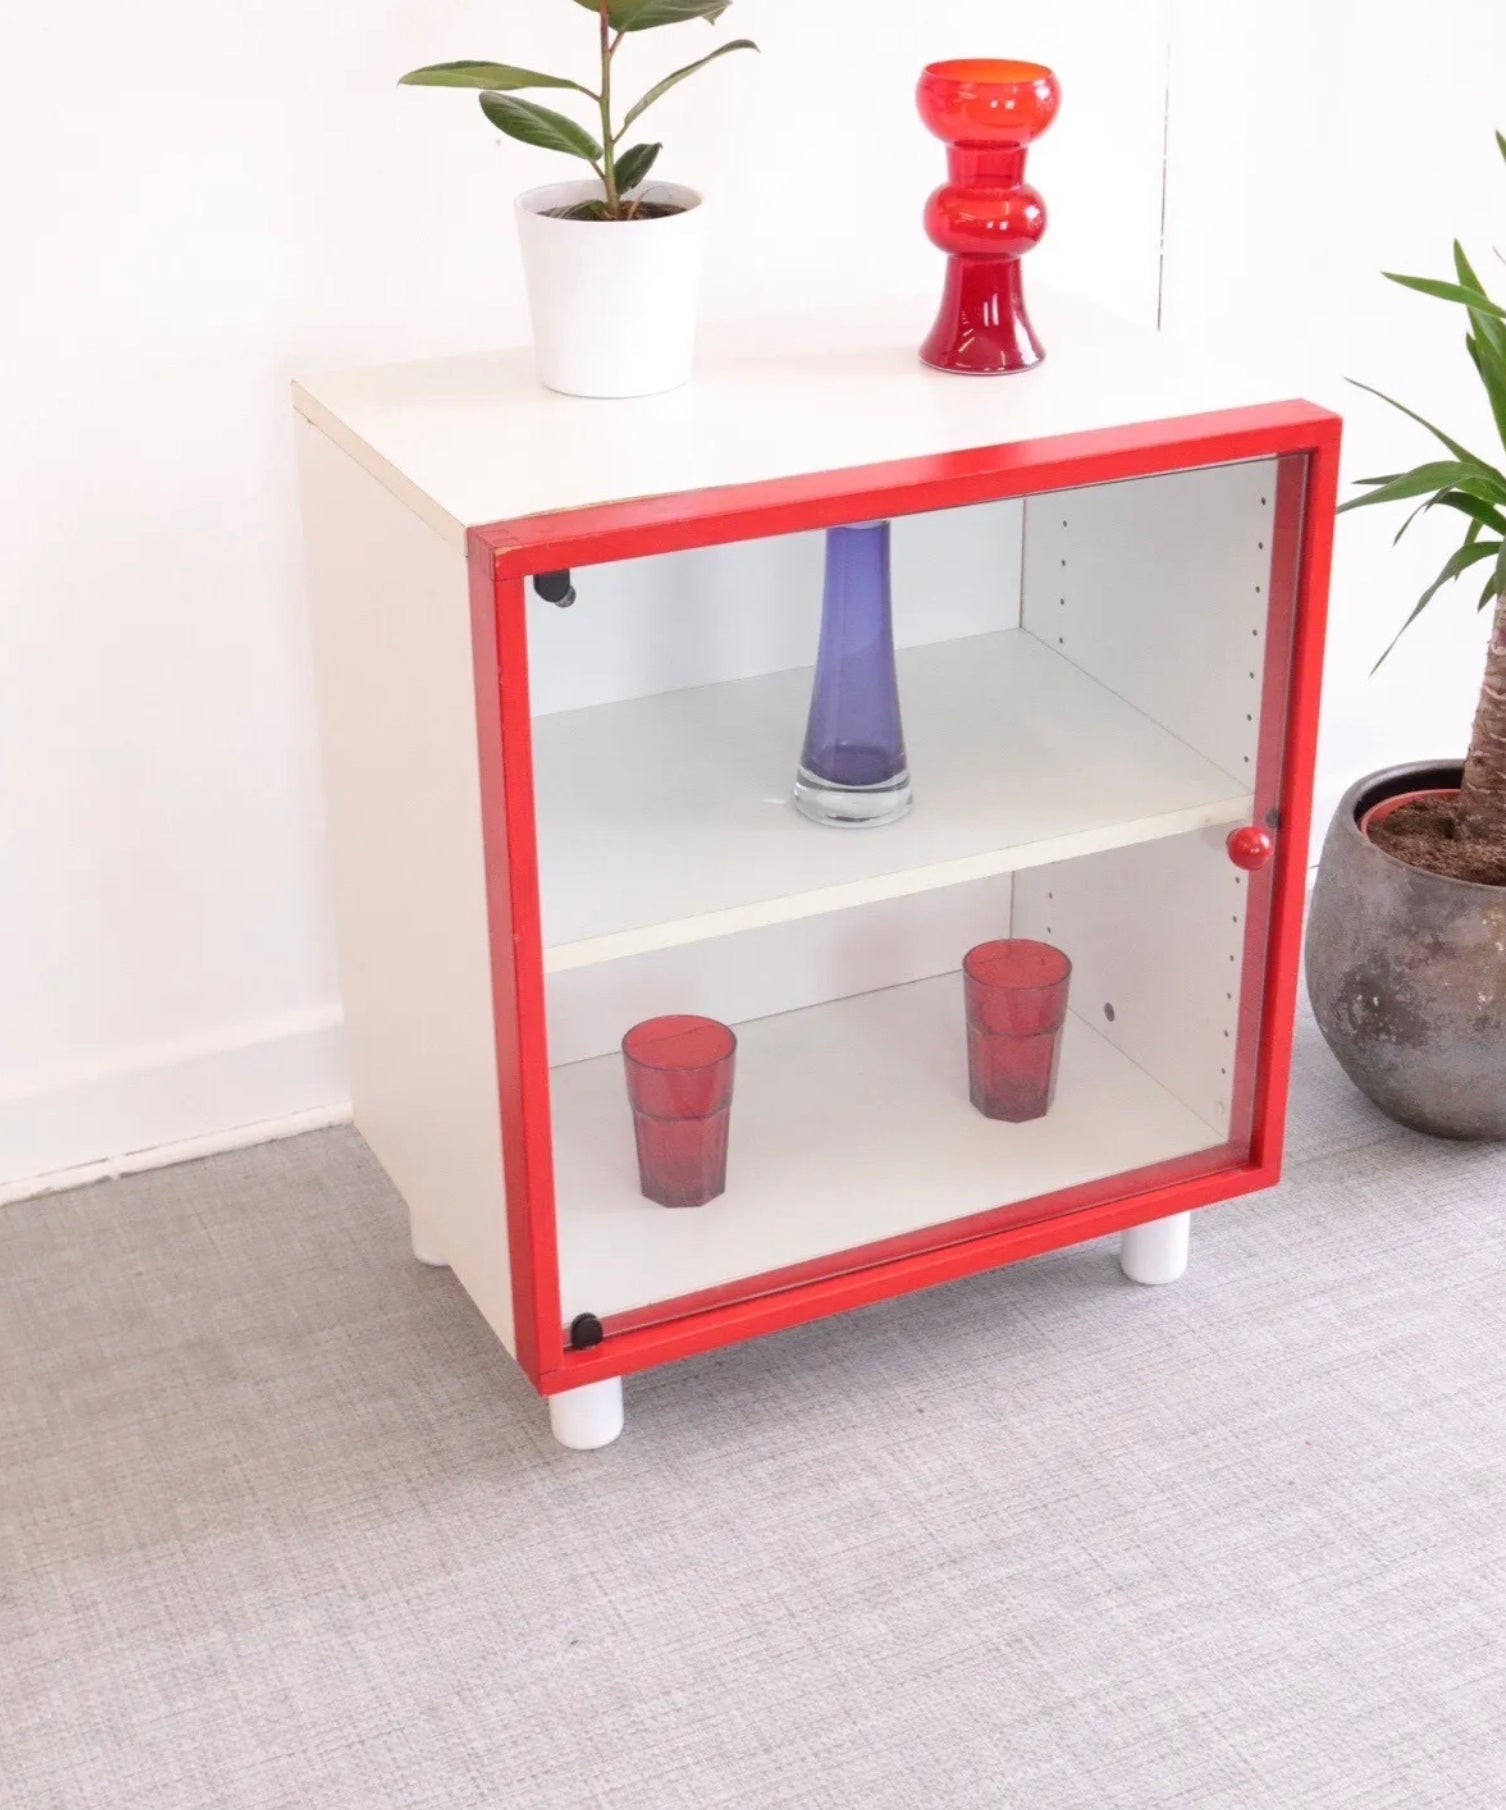 Vintage IKEA Glass & Wood Display Cabinets - White And Red Retro Style - teakyfinders